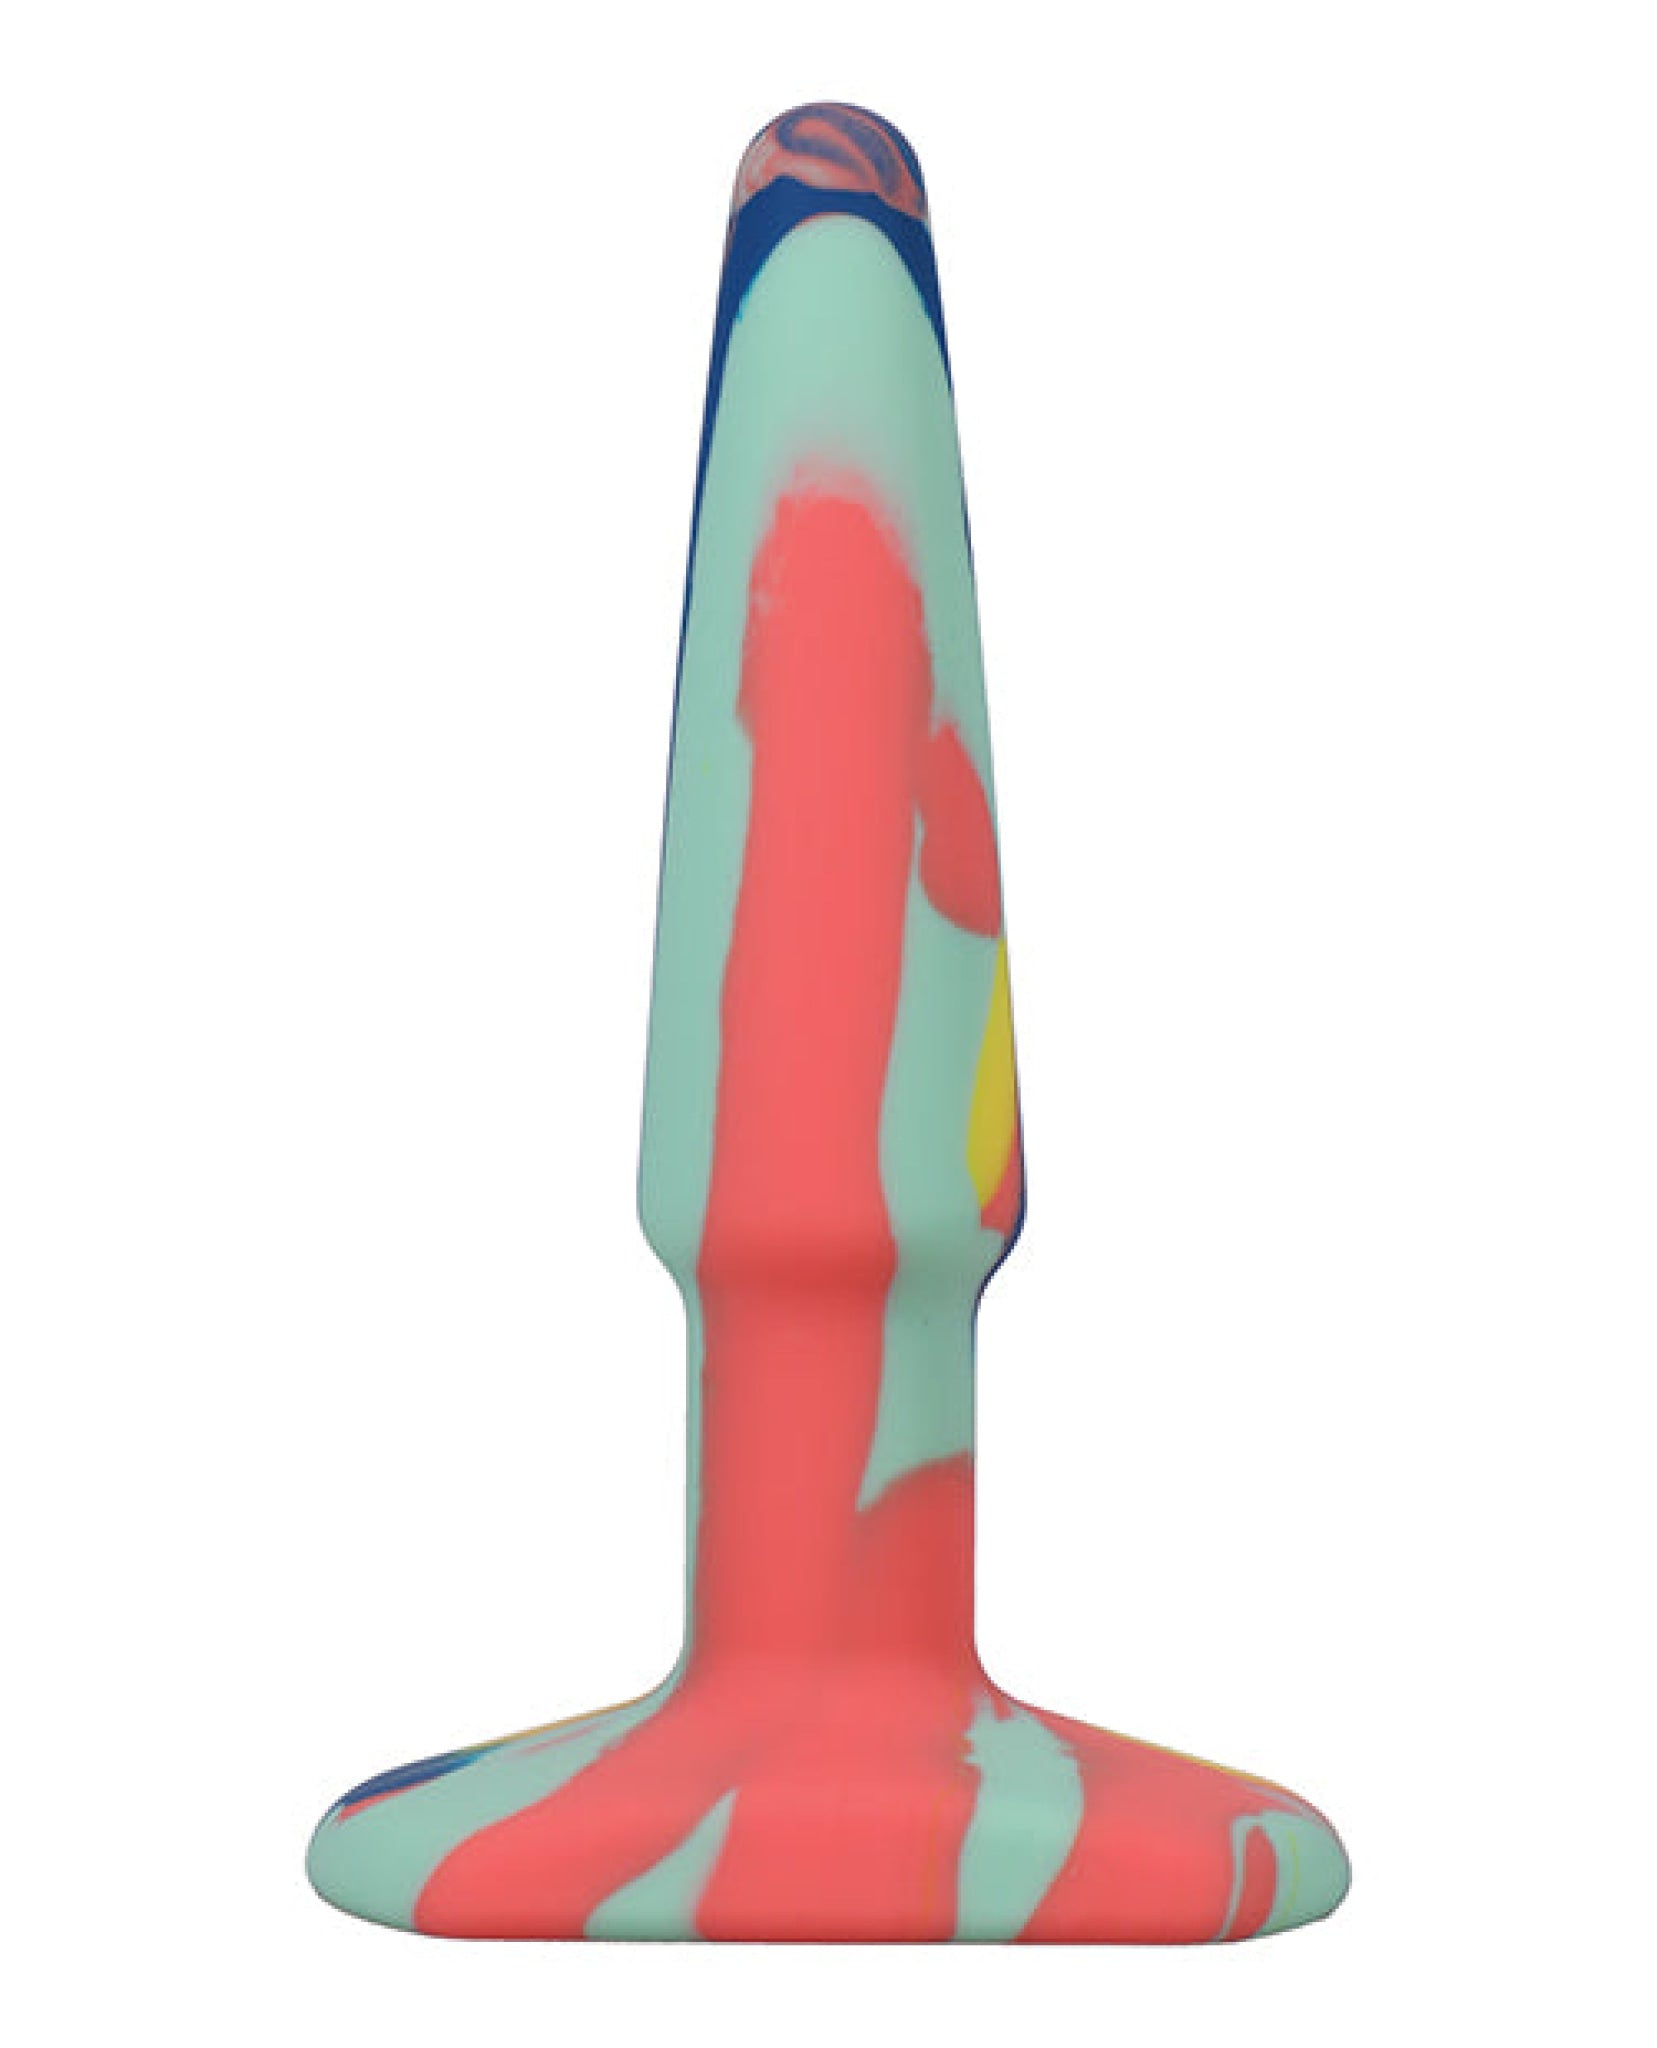 A Play 4" Groovy Silicone Anal Plug - Multicolor-yellow Doc Johnson